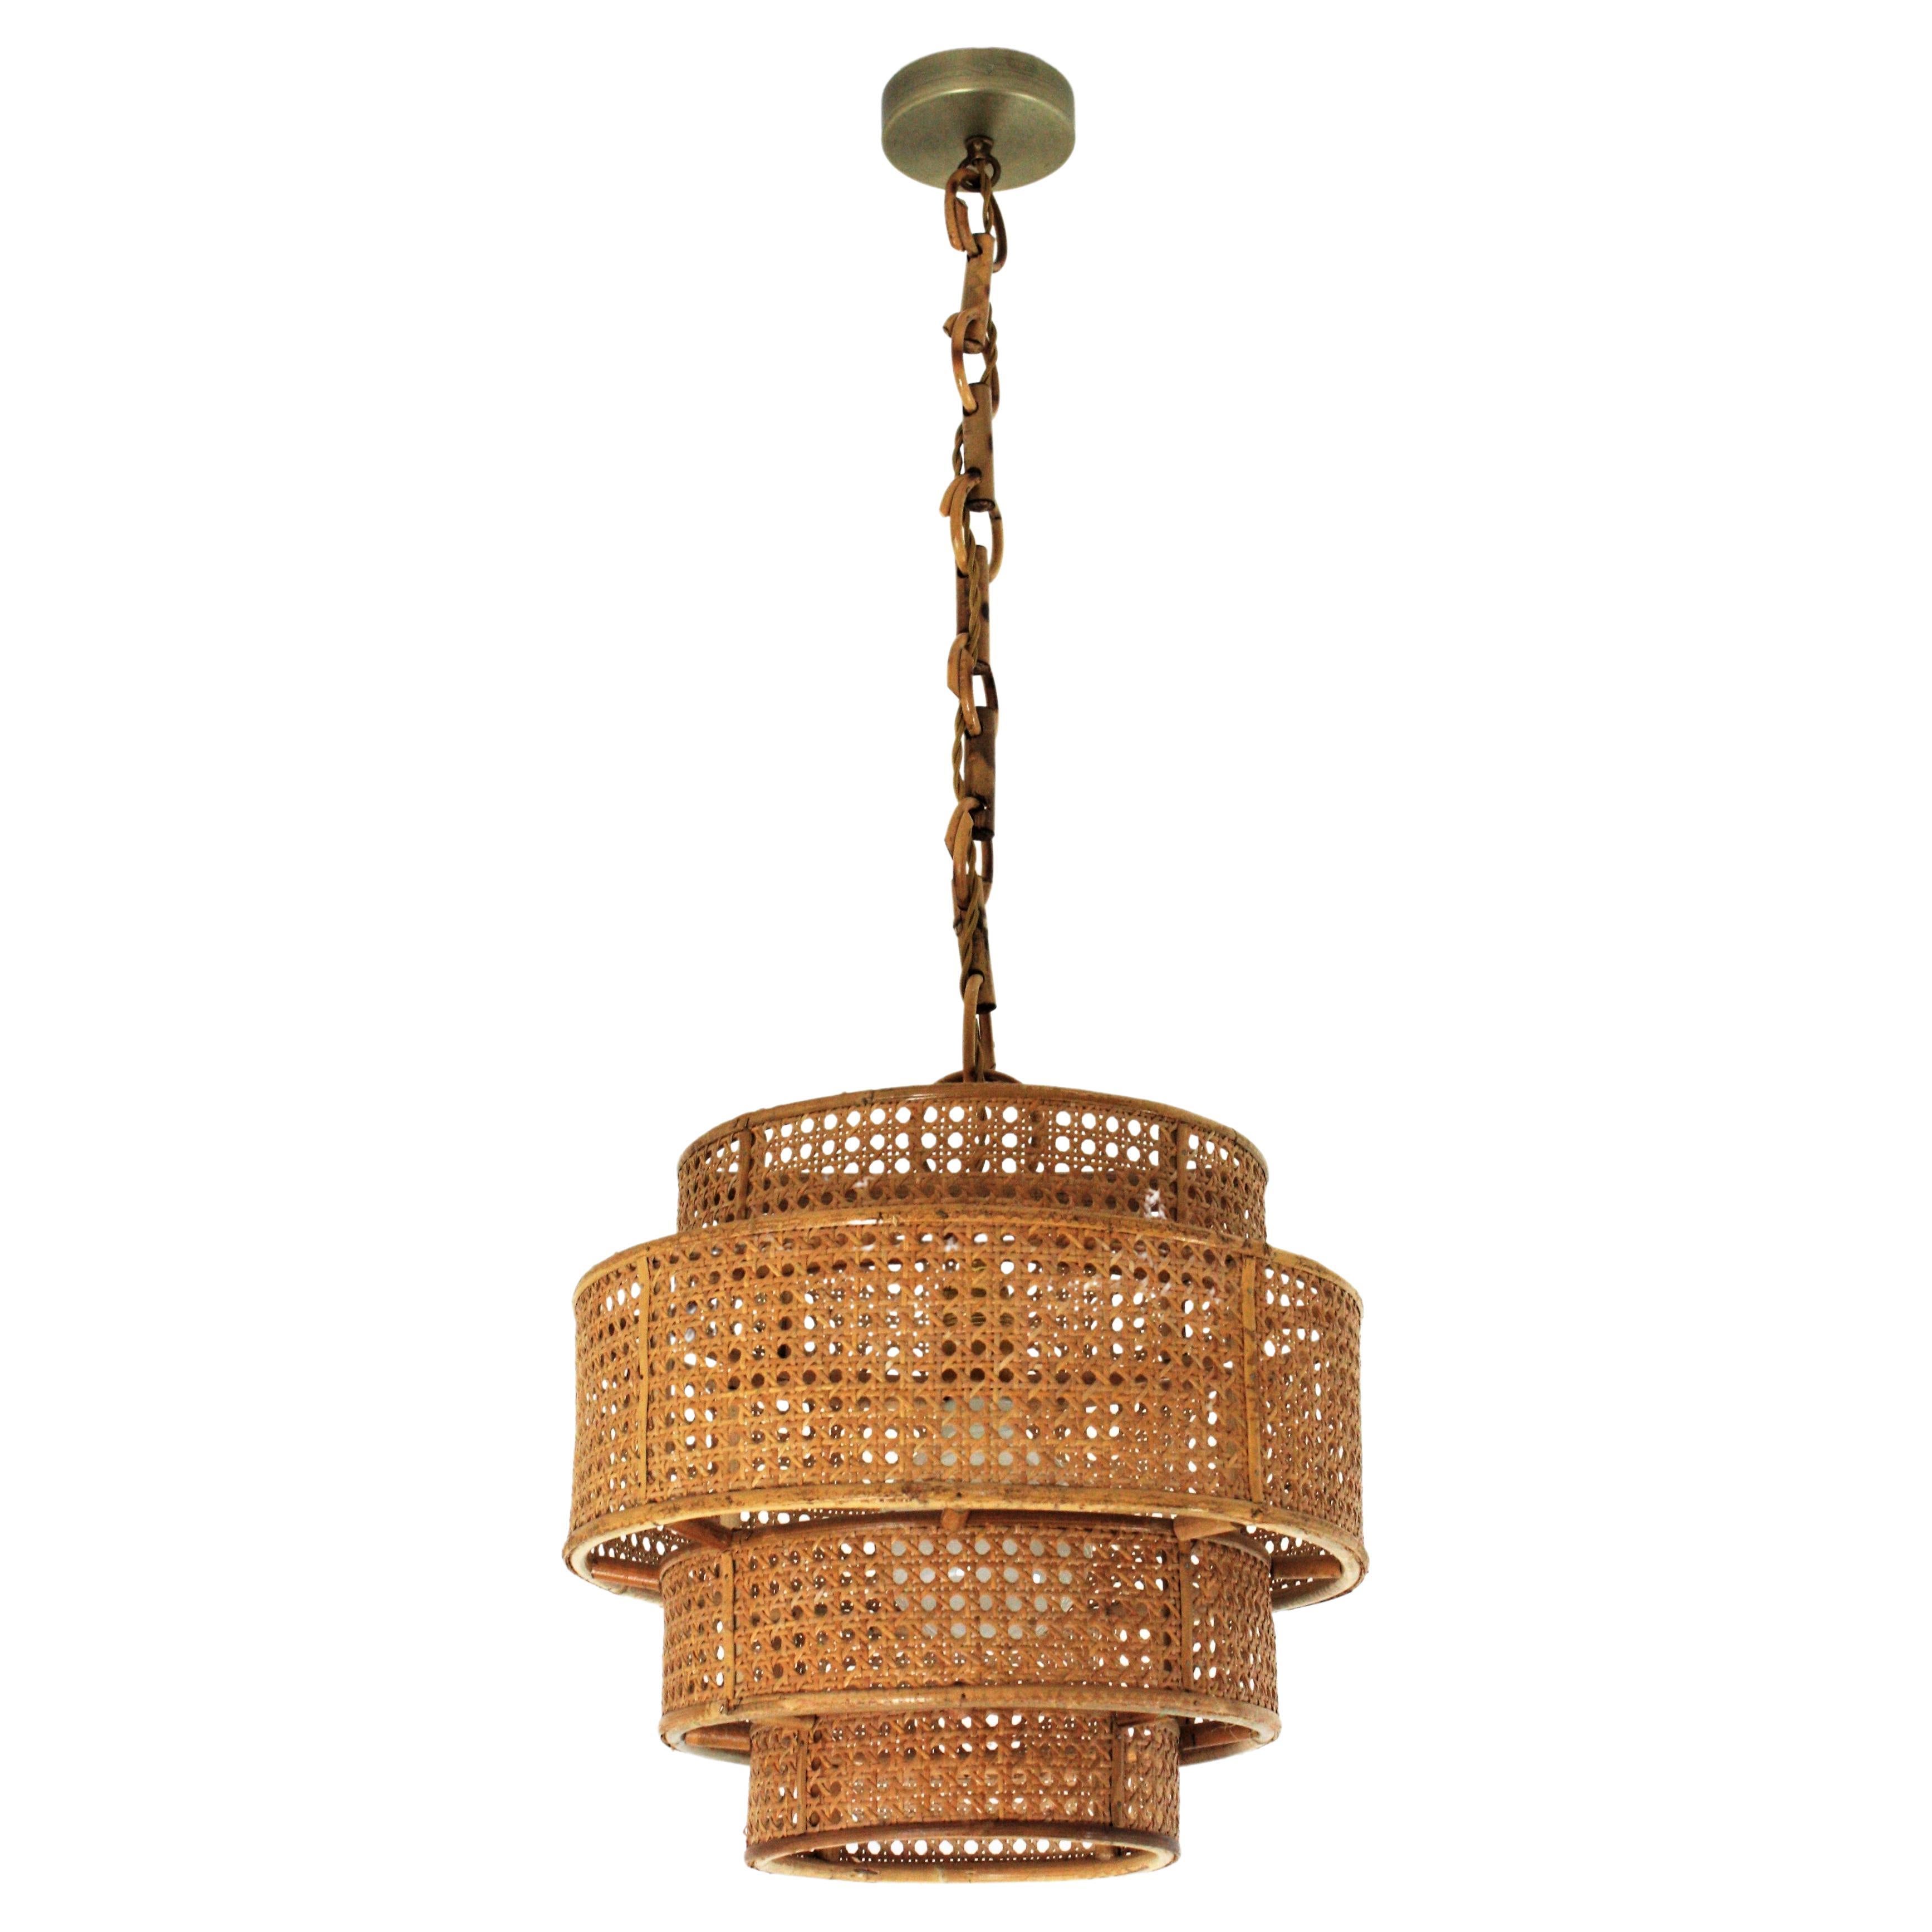  Rattan Wicker Weave Concentric Cylinder Pendant Hanging Light, 1960s For Sale